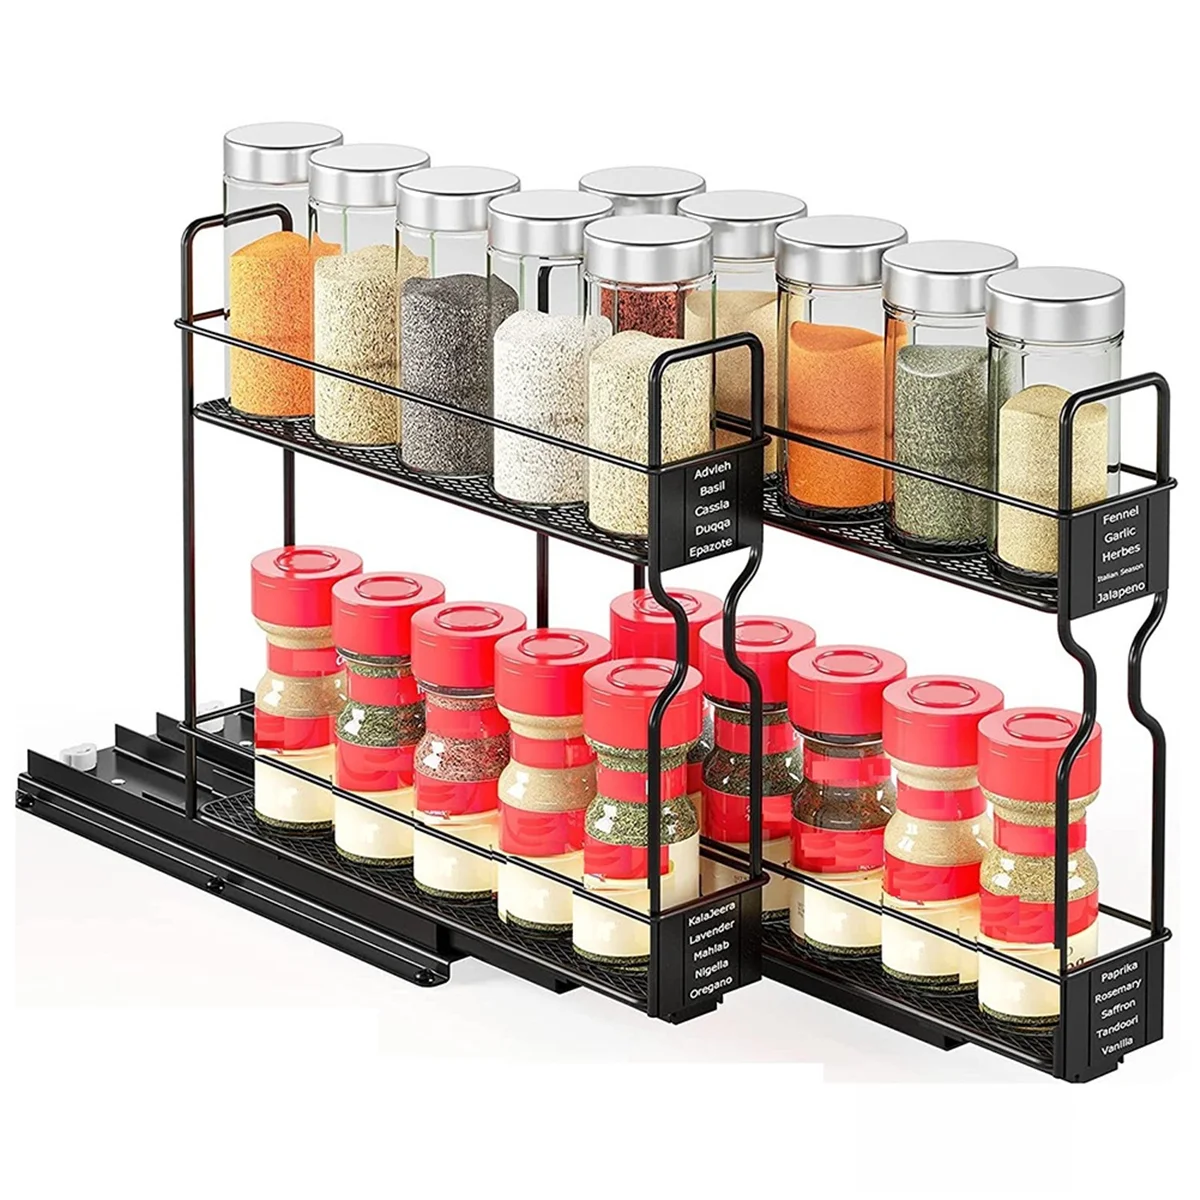 

Spice Rack Organizer, 2-Tier Pull Out Seasoning Rack for Kitchen Cabinet, Spice Drawer Organizer Shelf for Small Space